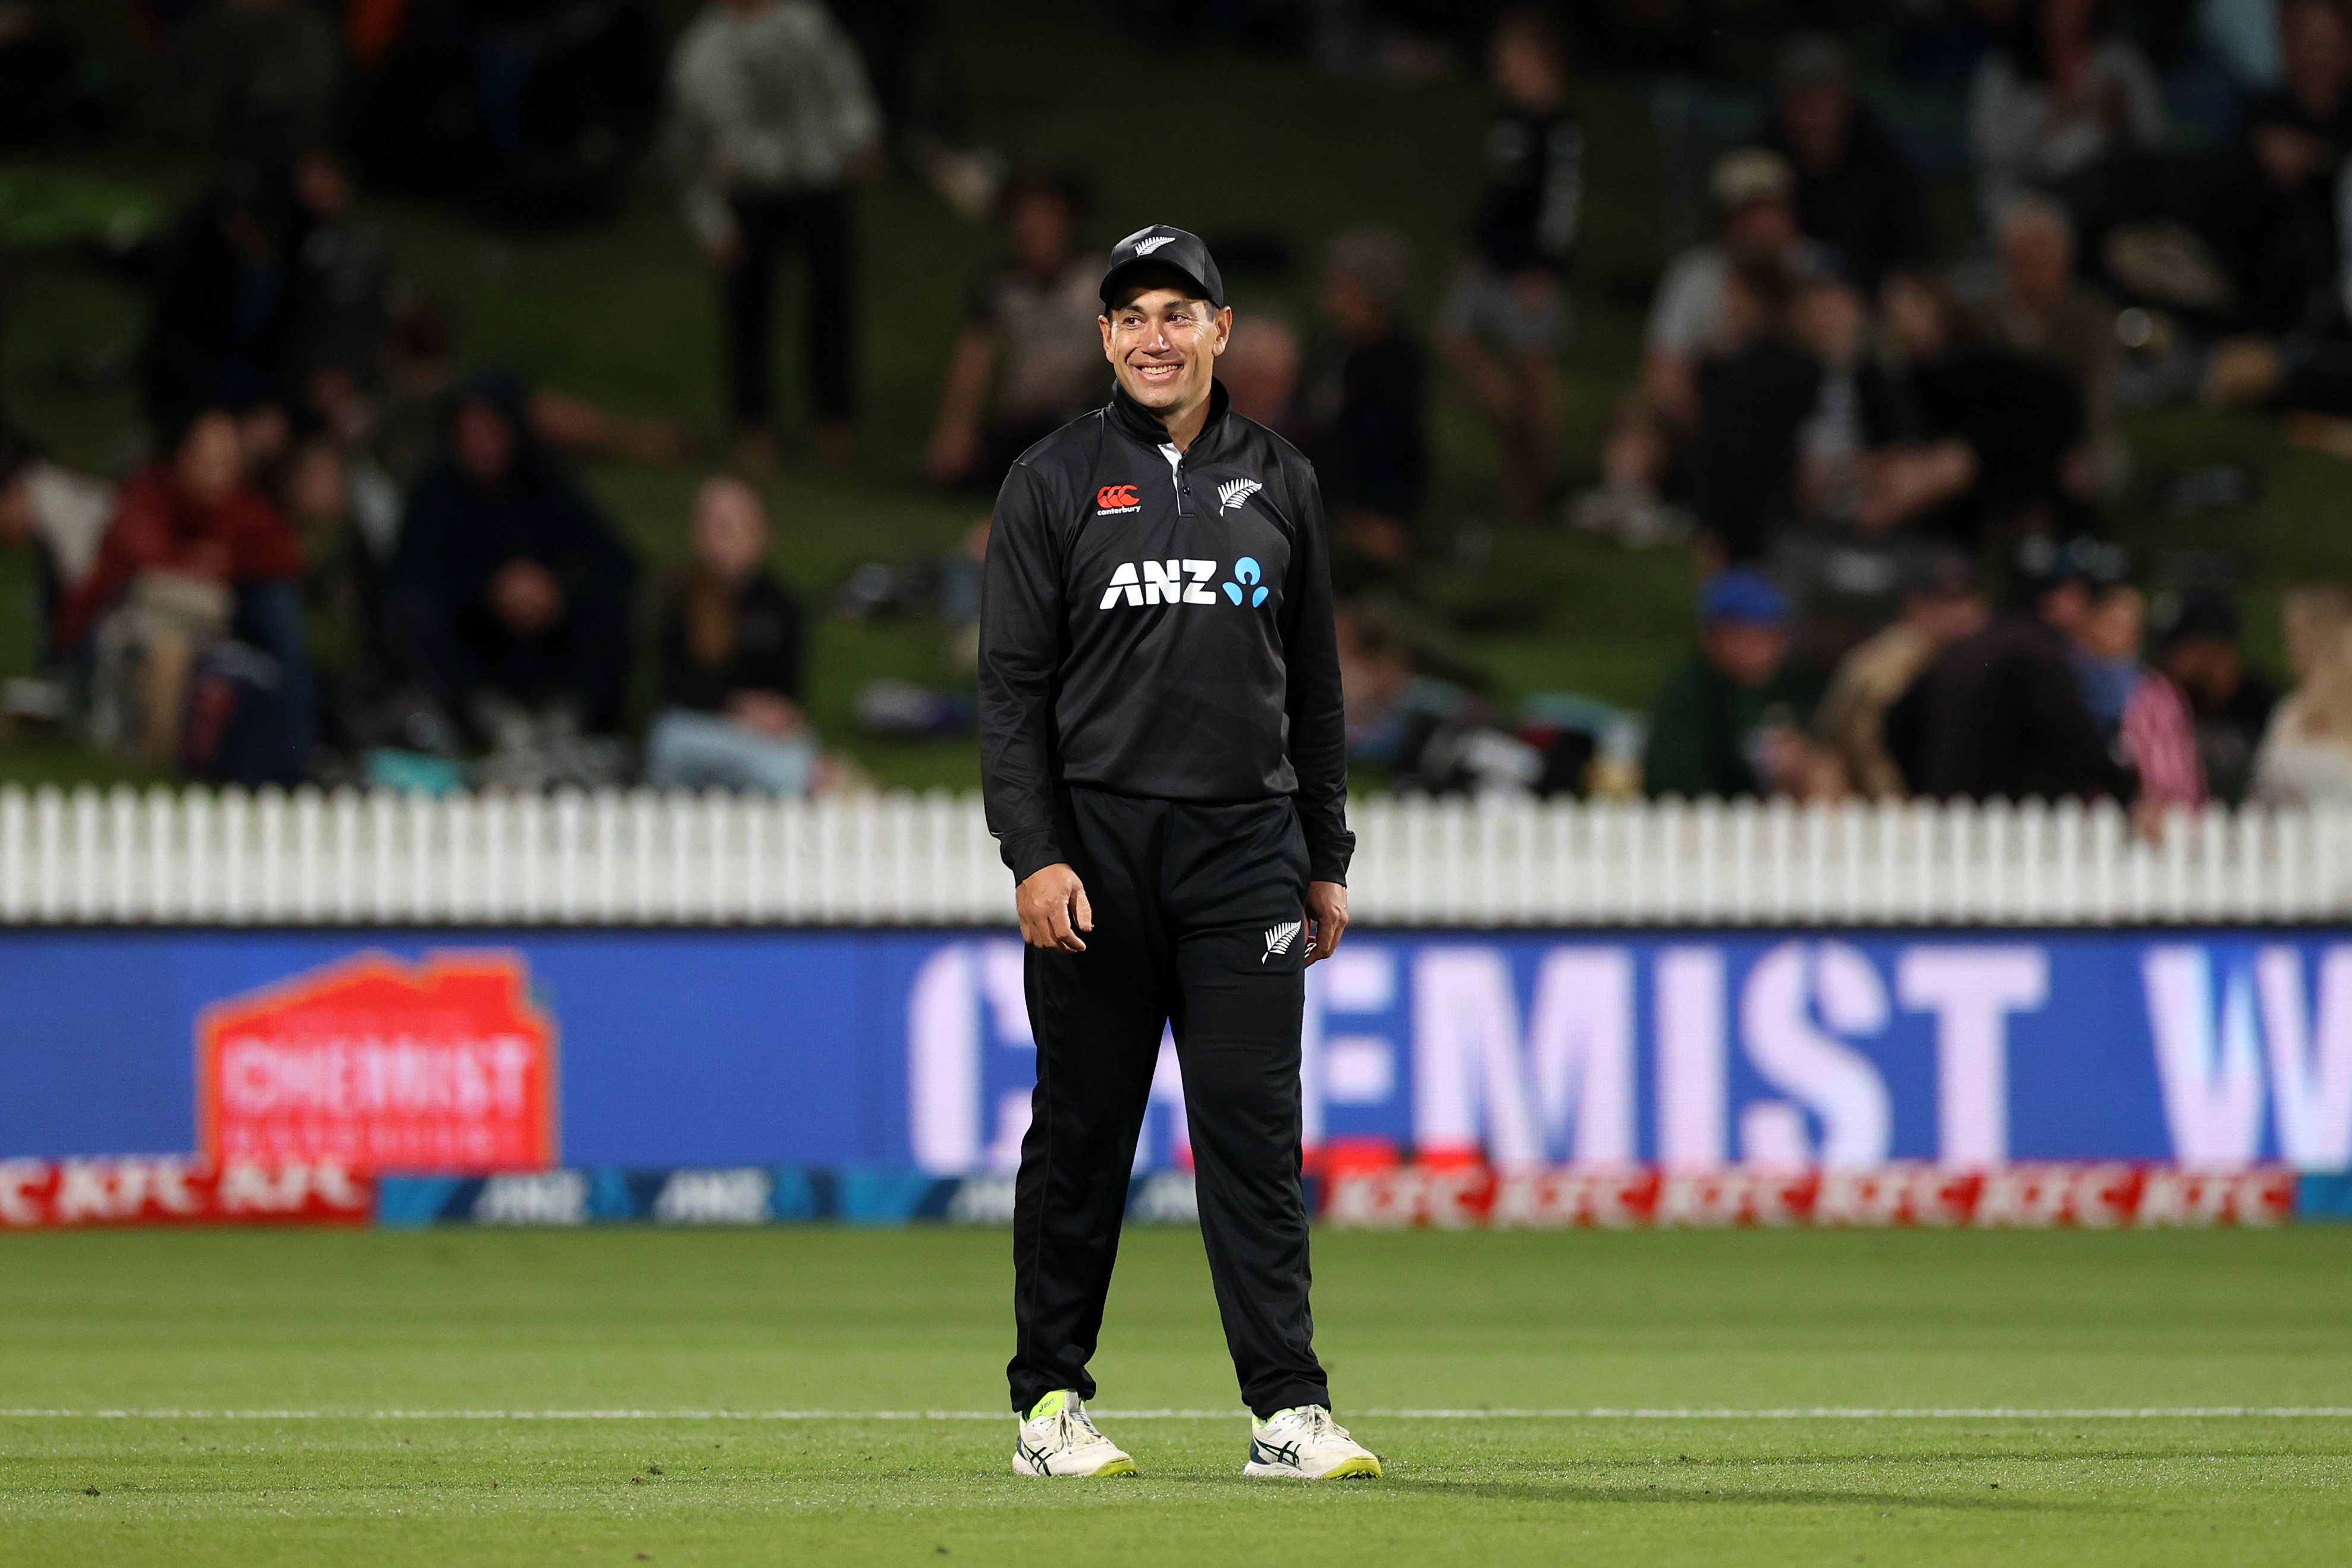 Ross Taylor: A run-machine born in New Zealand to break records